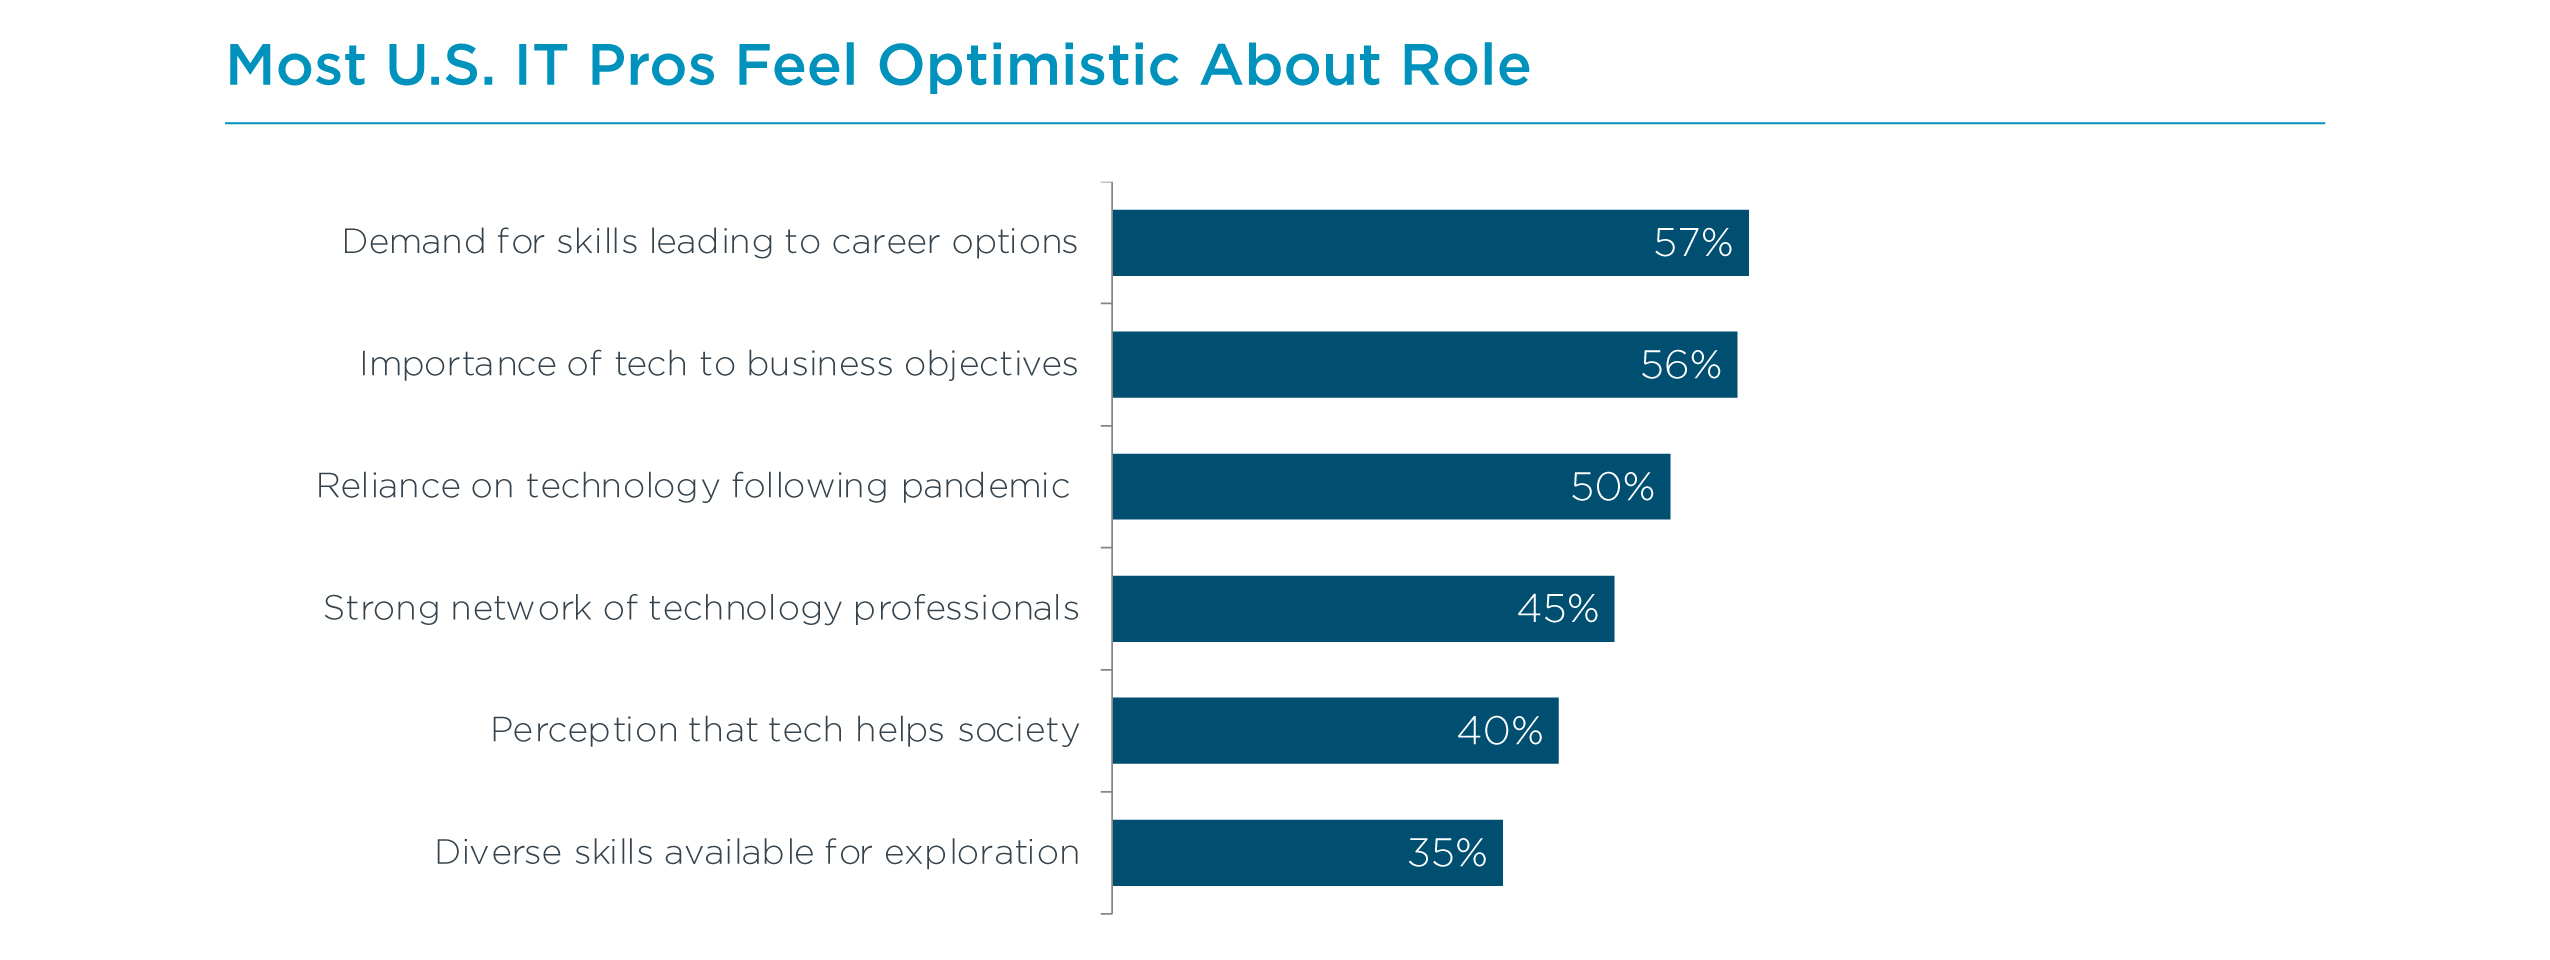 Most U.S. IT Pros Feel Optimistic About Role